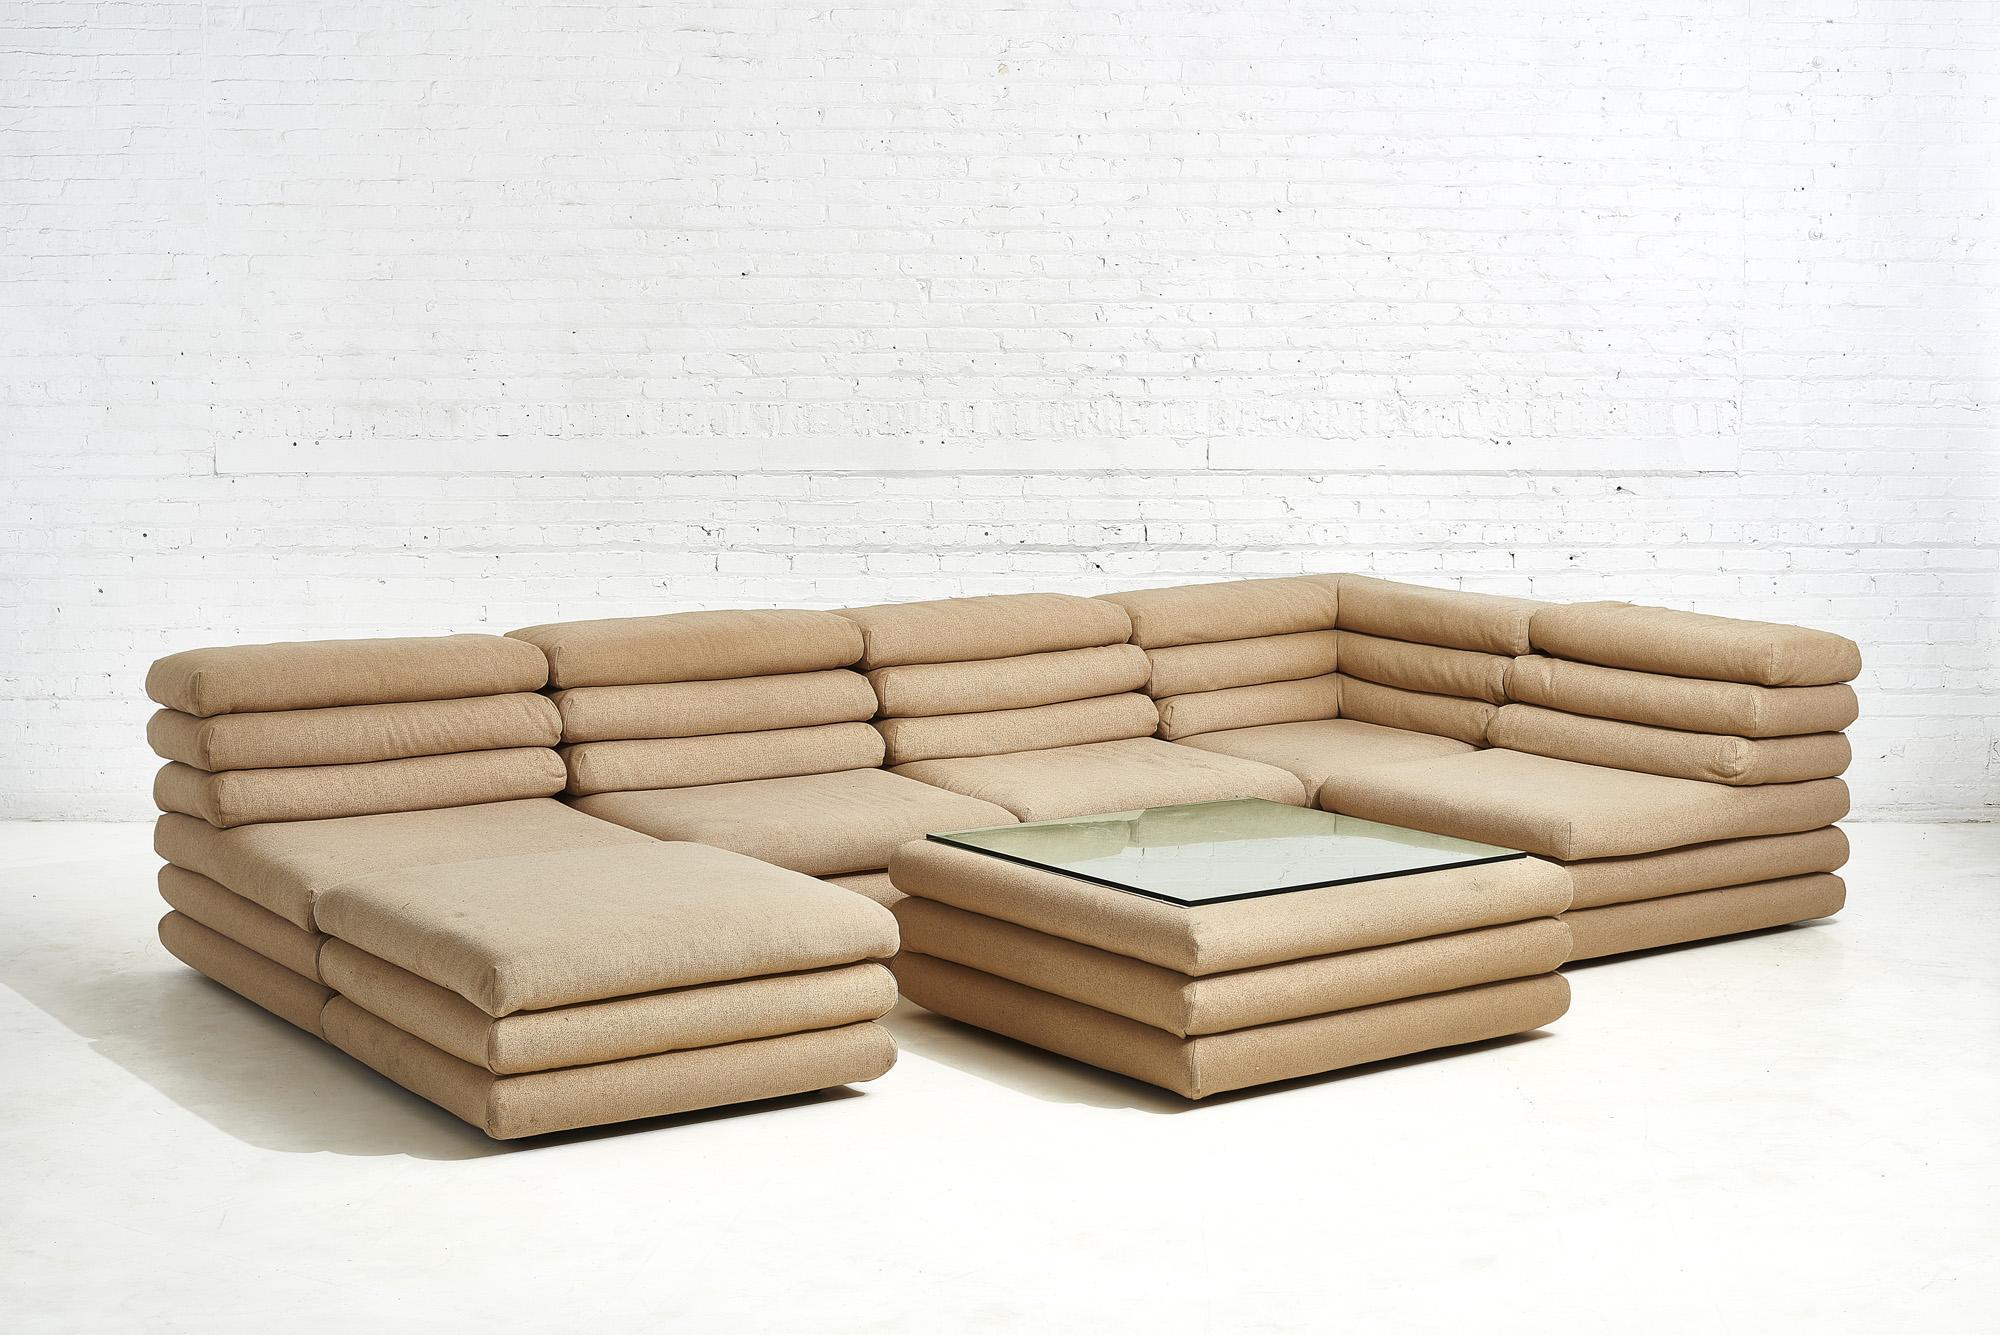 stackable couch